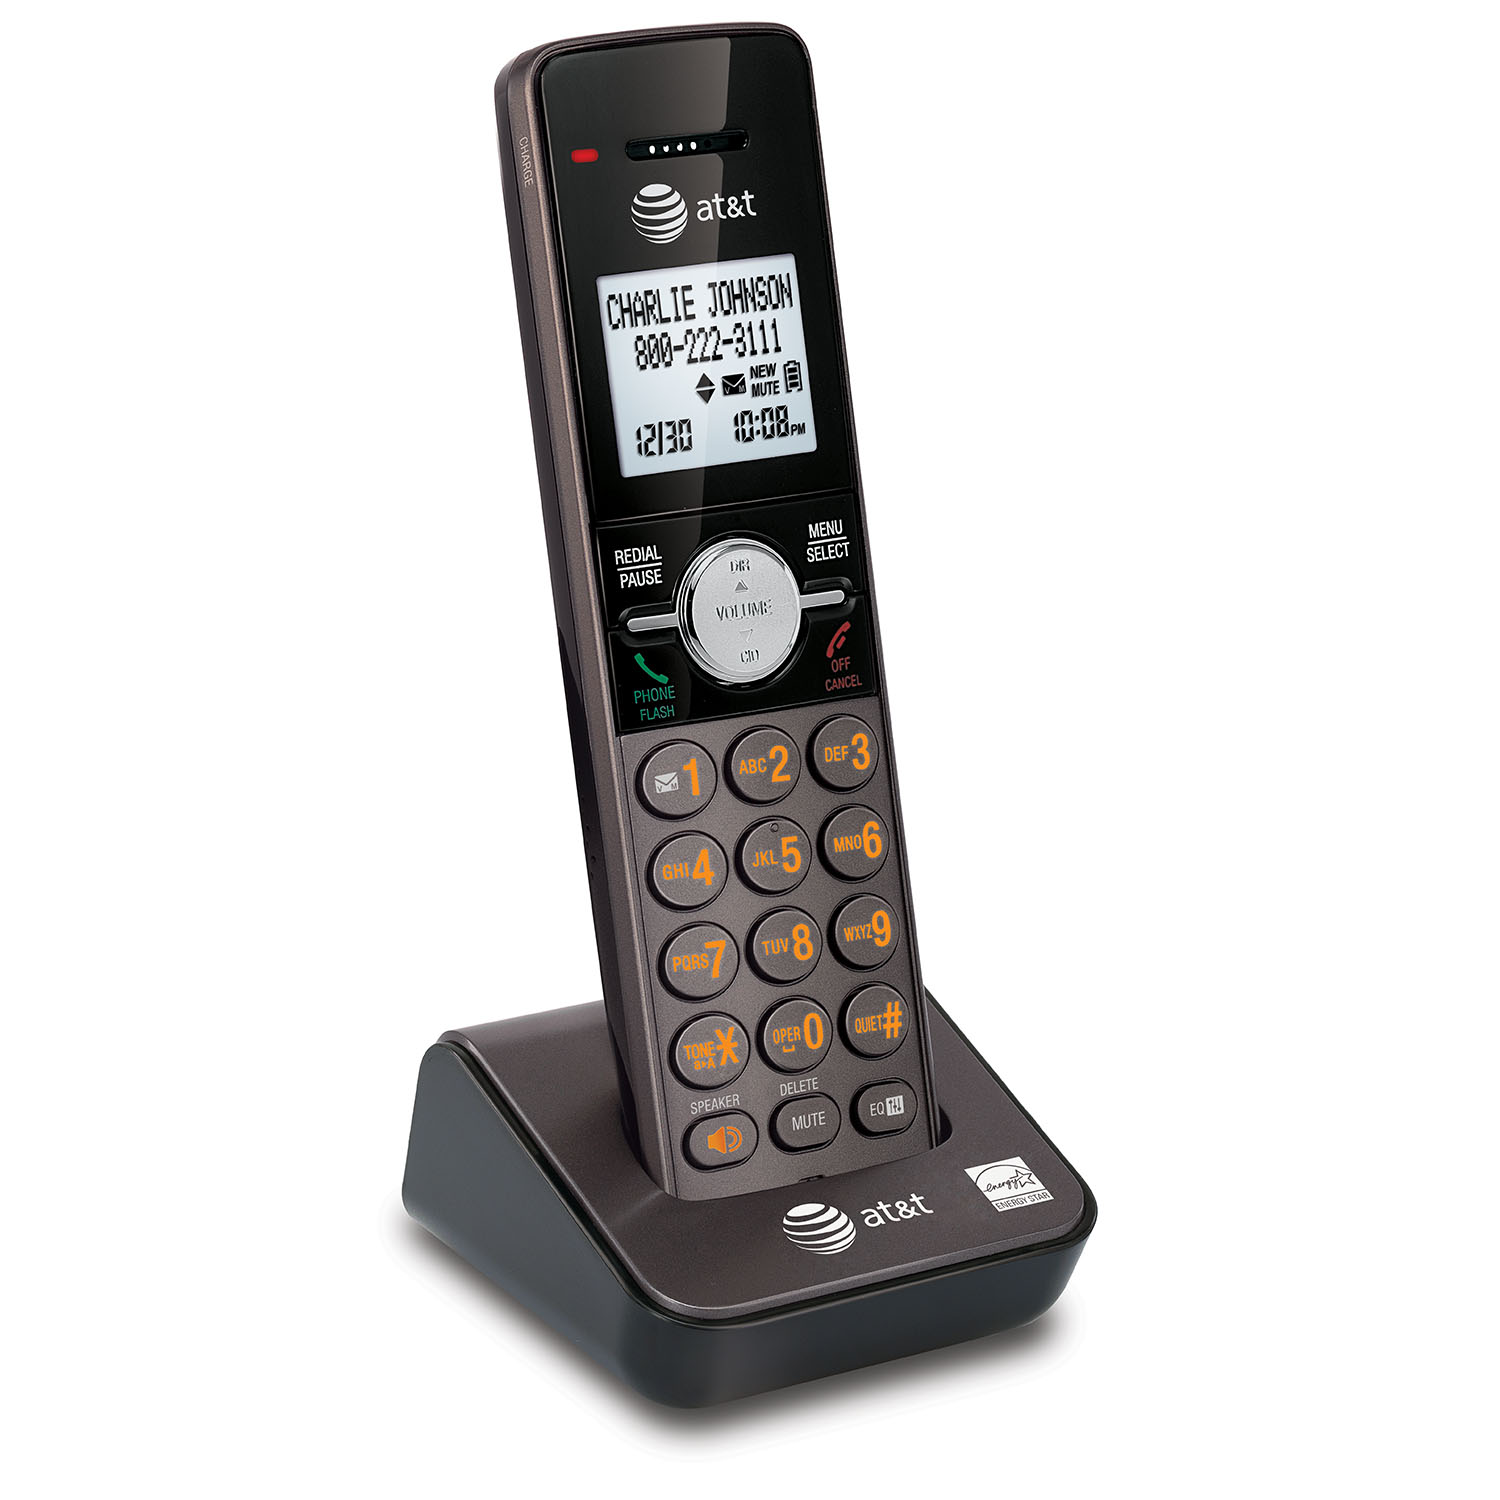 6 handset cordless answering system with caller ID/call waiting - view 11